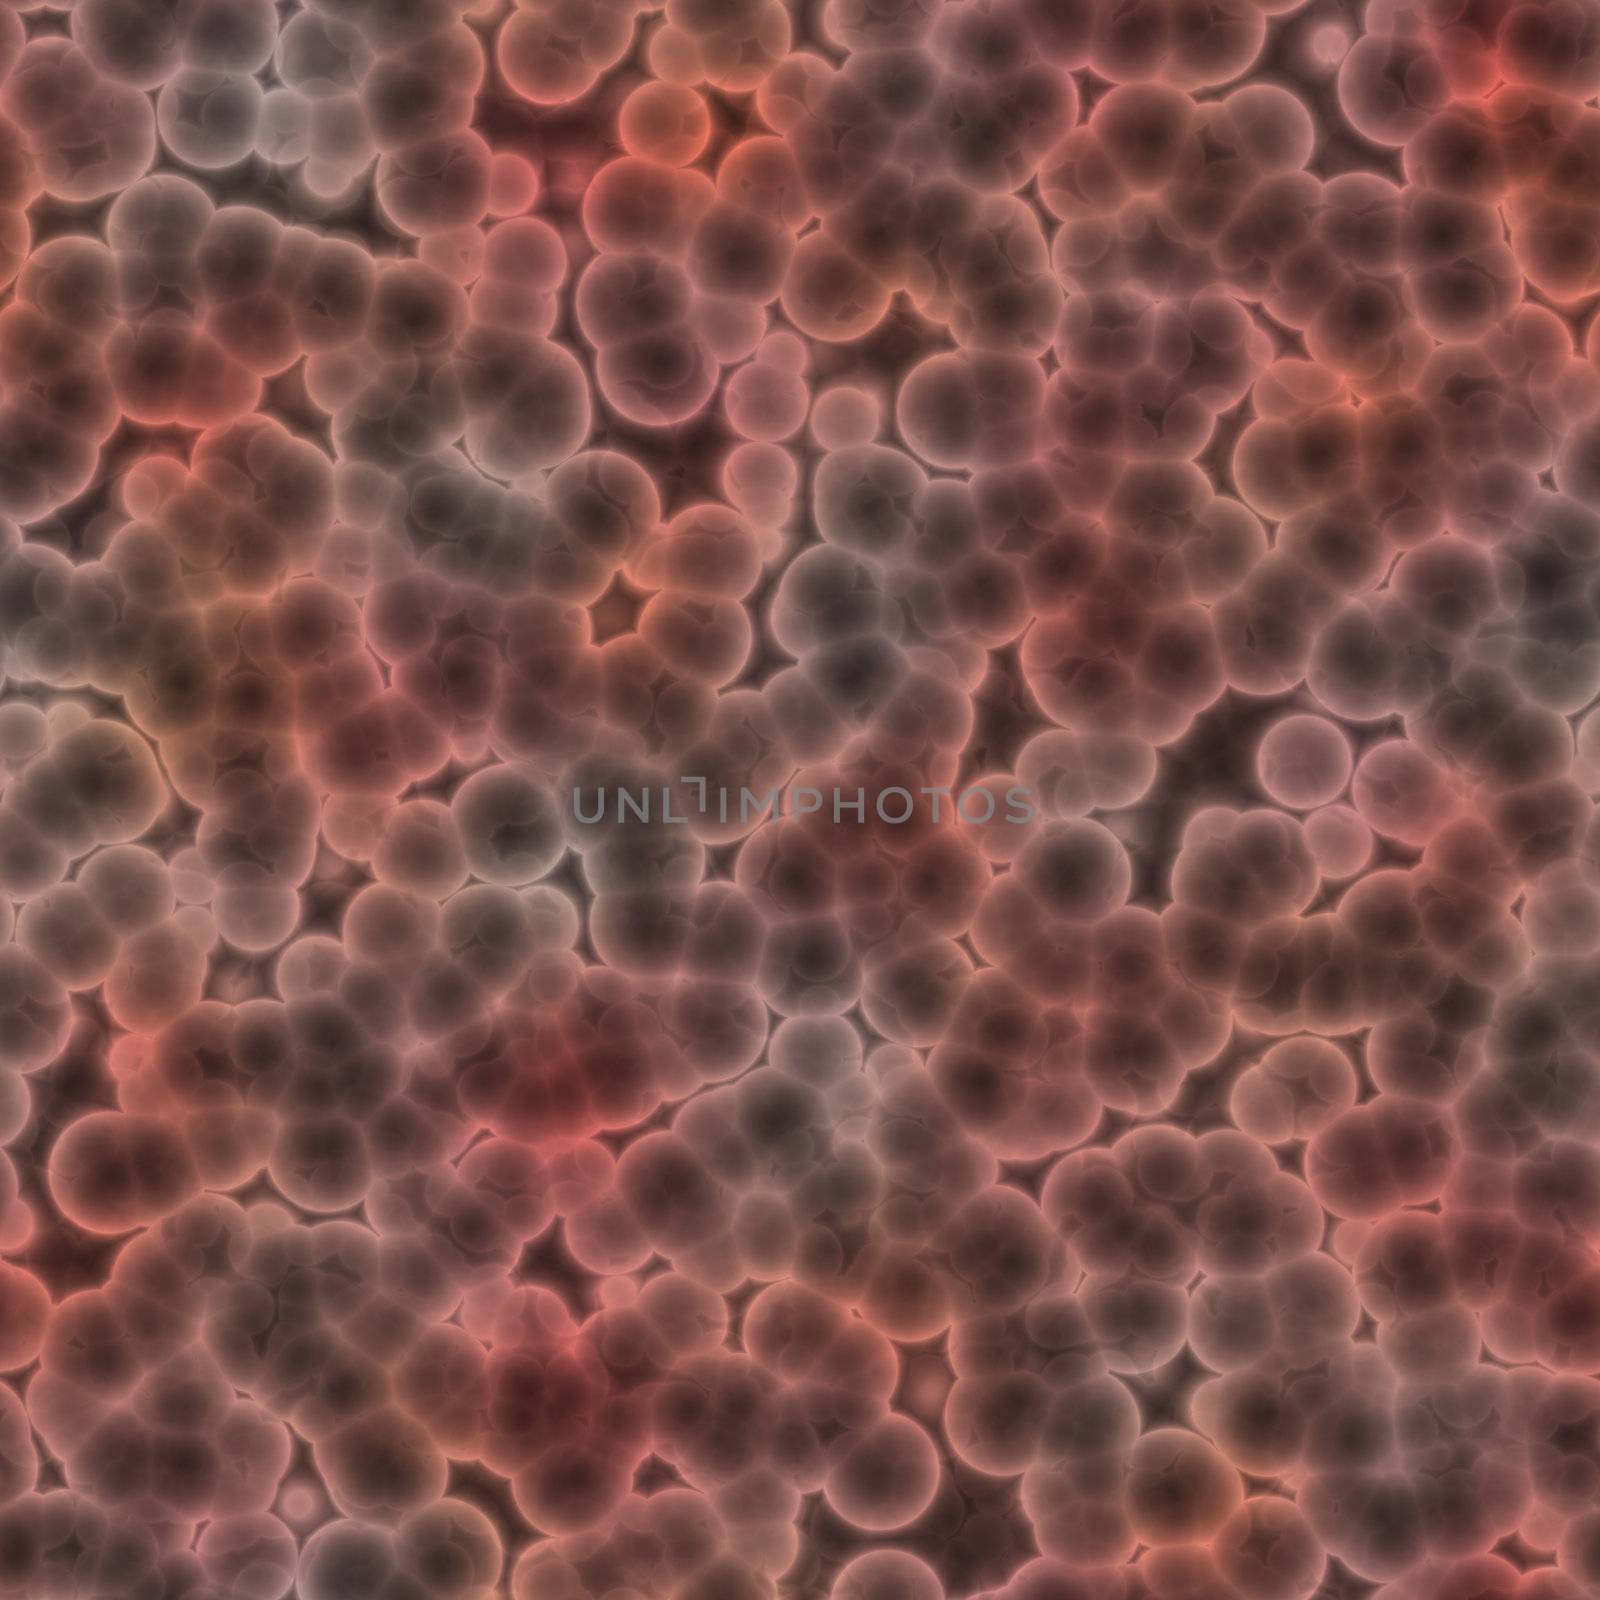 Illustration of red bacterial cell growth diseased cellular material seamless